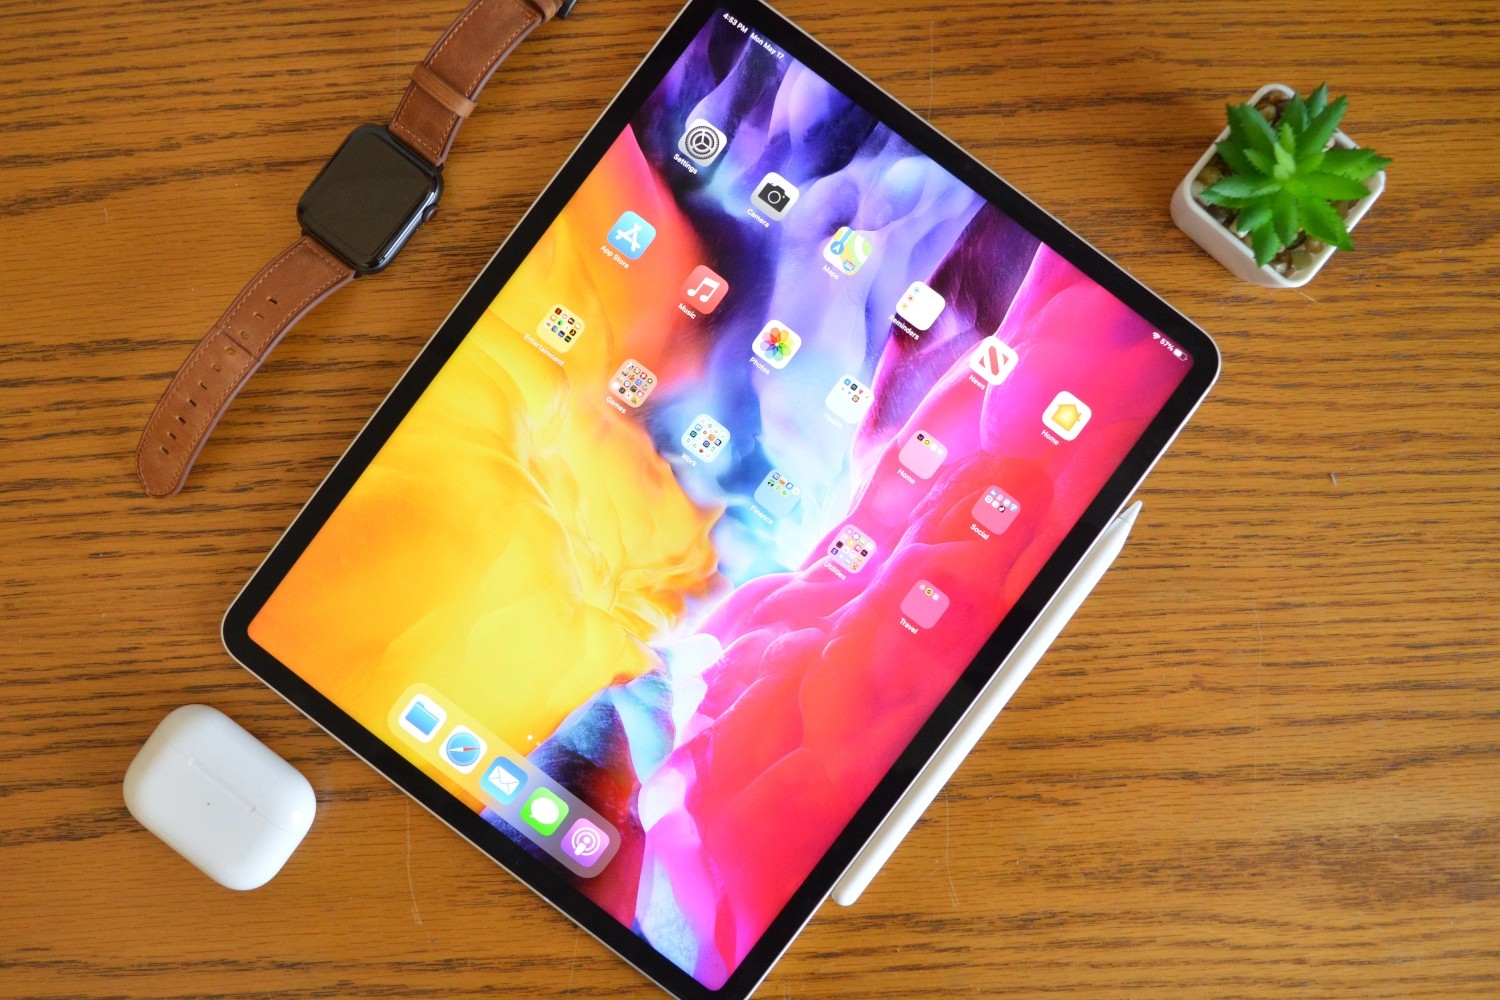 Apple could bring OLED display to iPad Air in 2022, iPad Pro in 2023